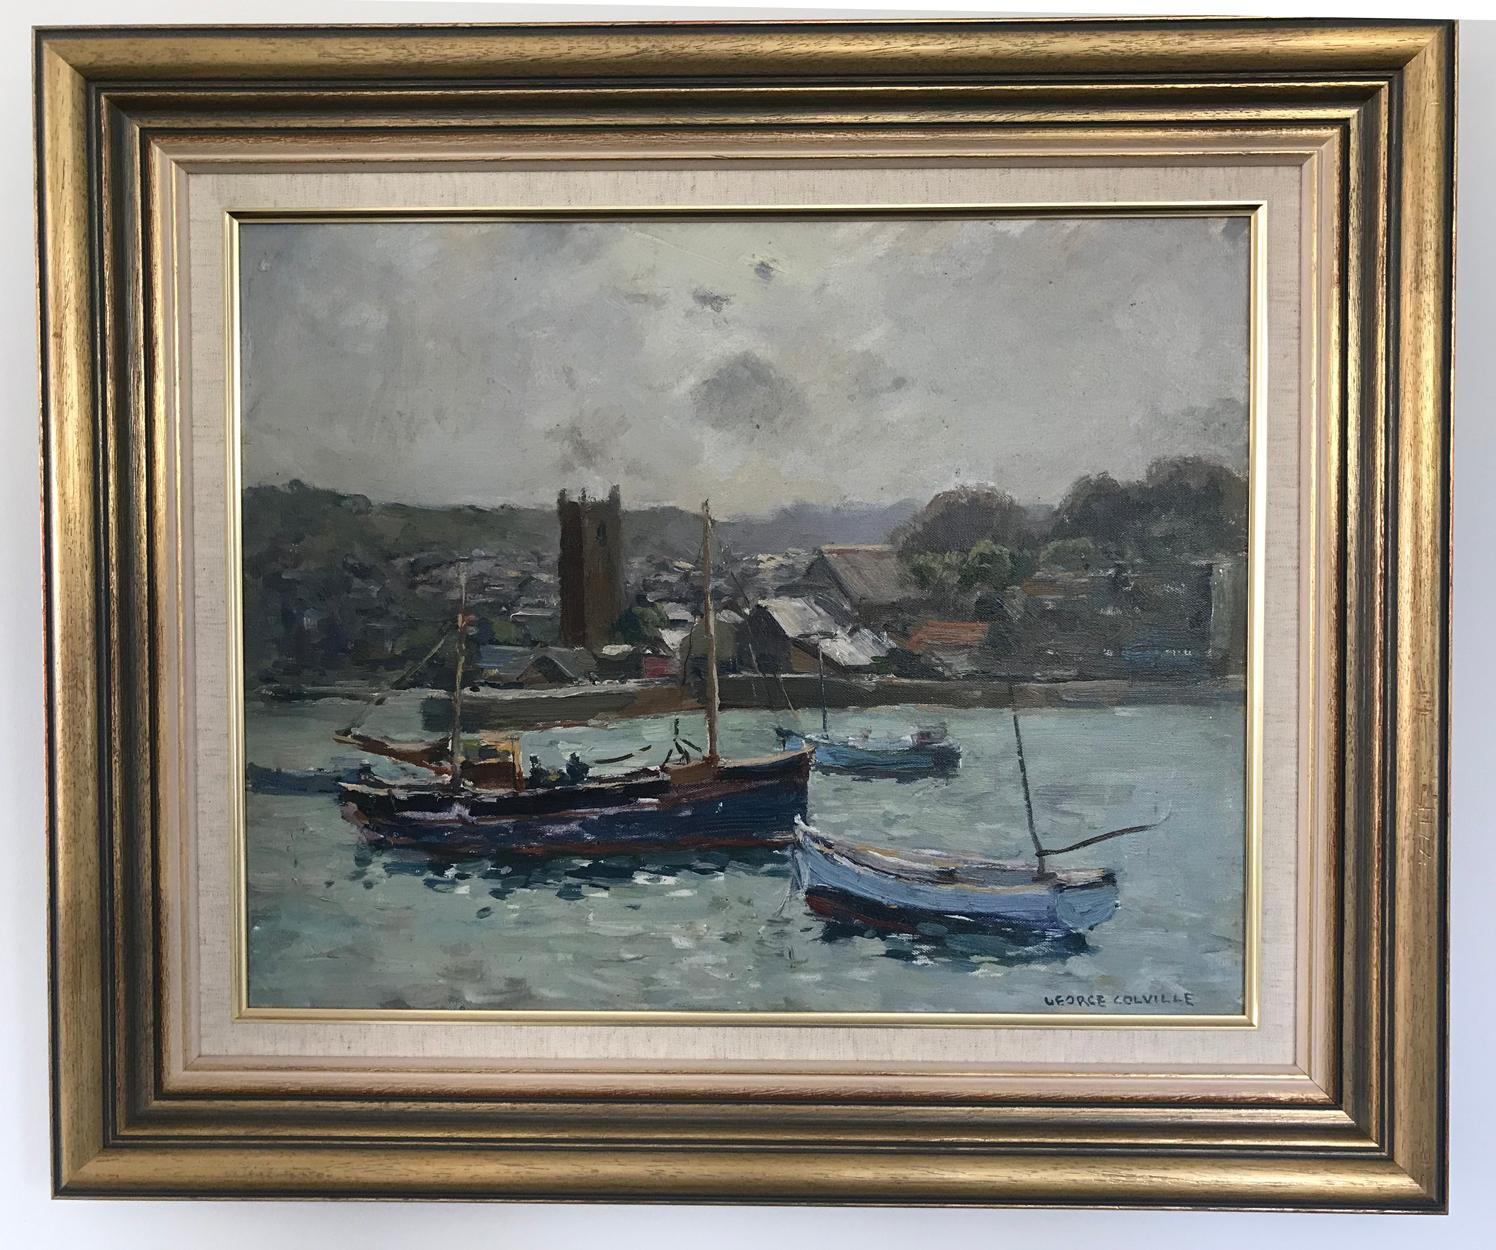 George Garden Colville (Scottish 1887-1970) - St Ives Harbour, Cornwall, oil on board, signed lower right.

Both painting and frame are in good condition, ready to hang.

Born in Aberdeen, Scotland in 1887, George Colville moved to Australia in